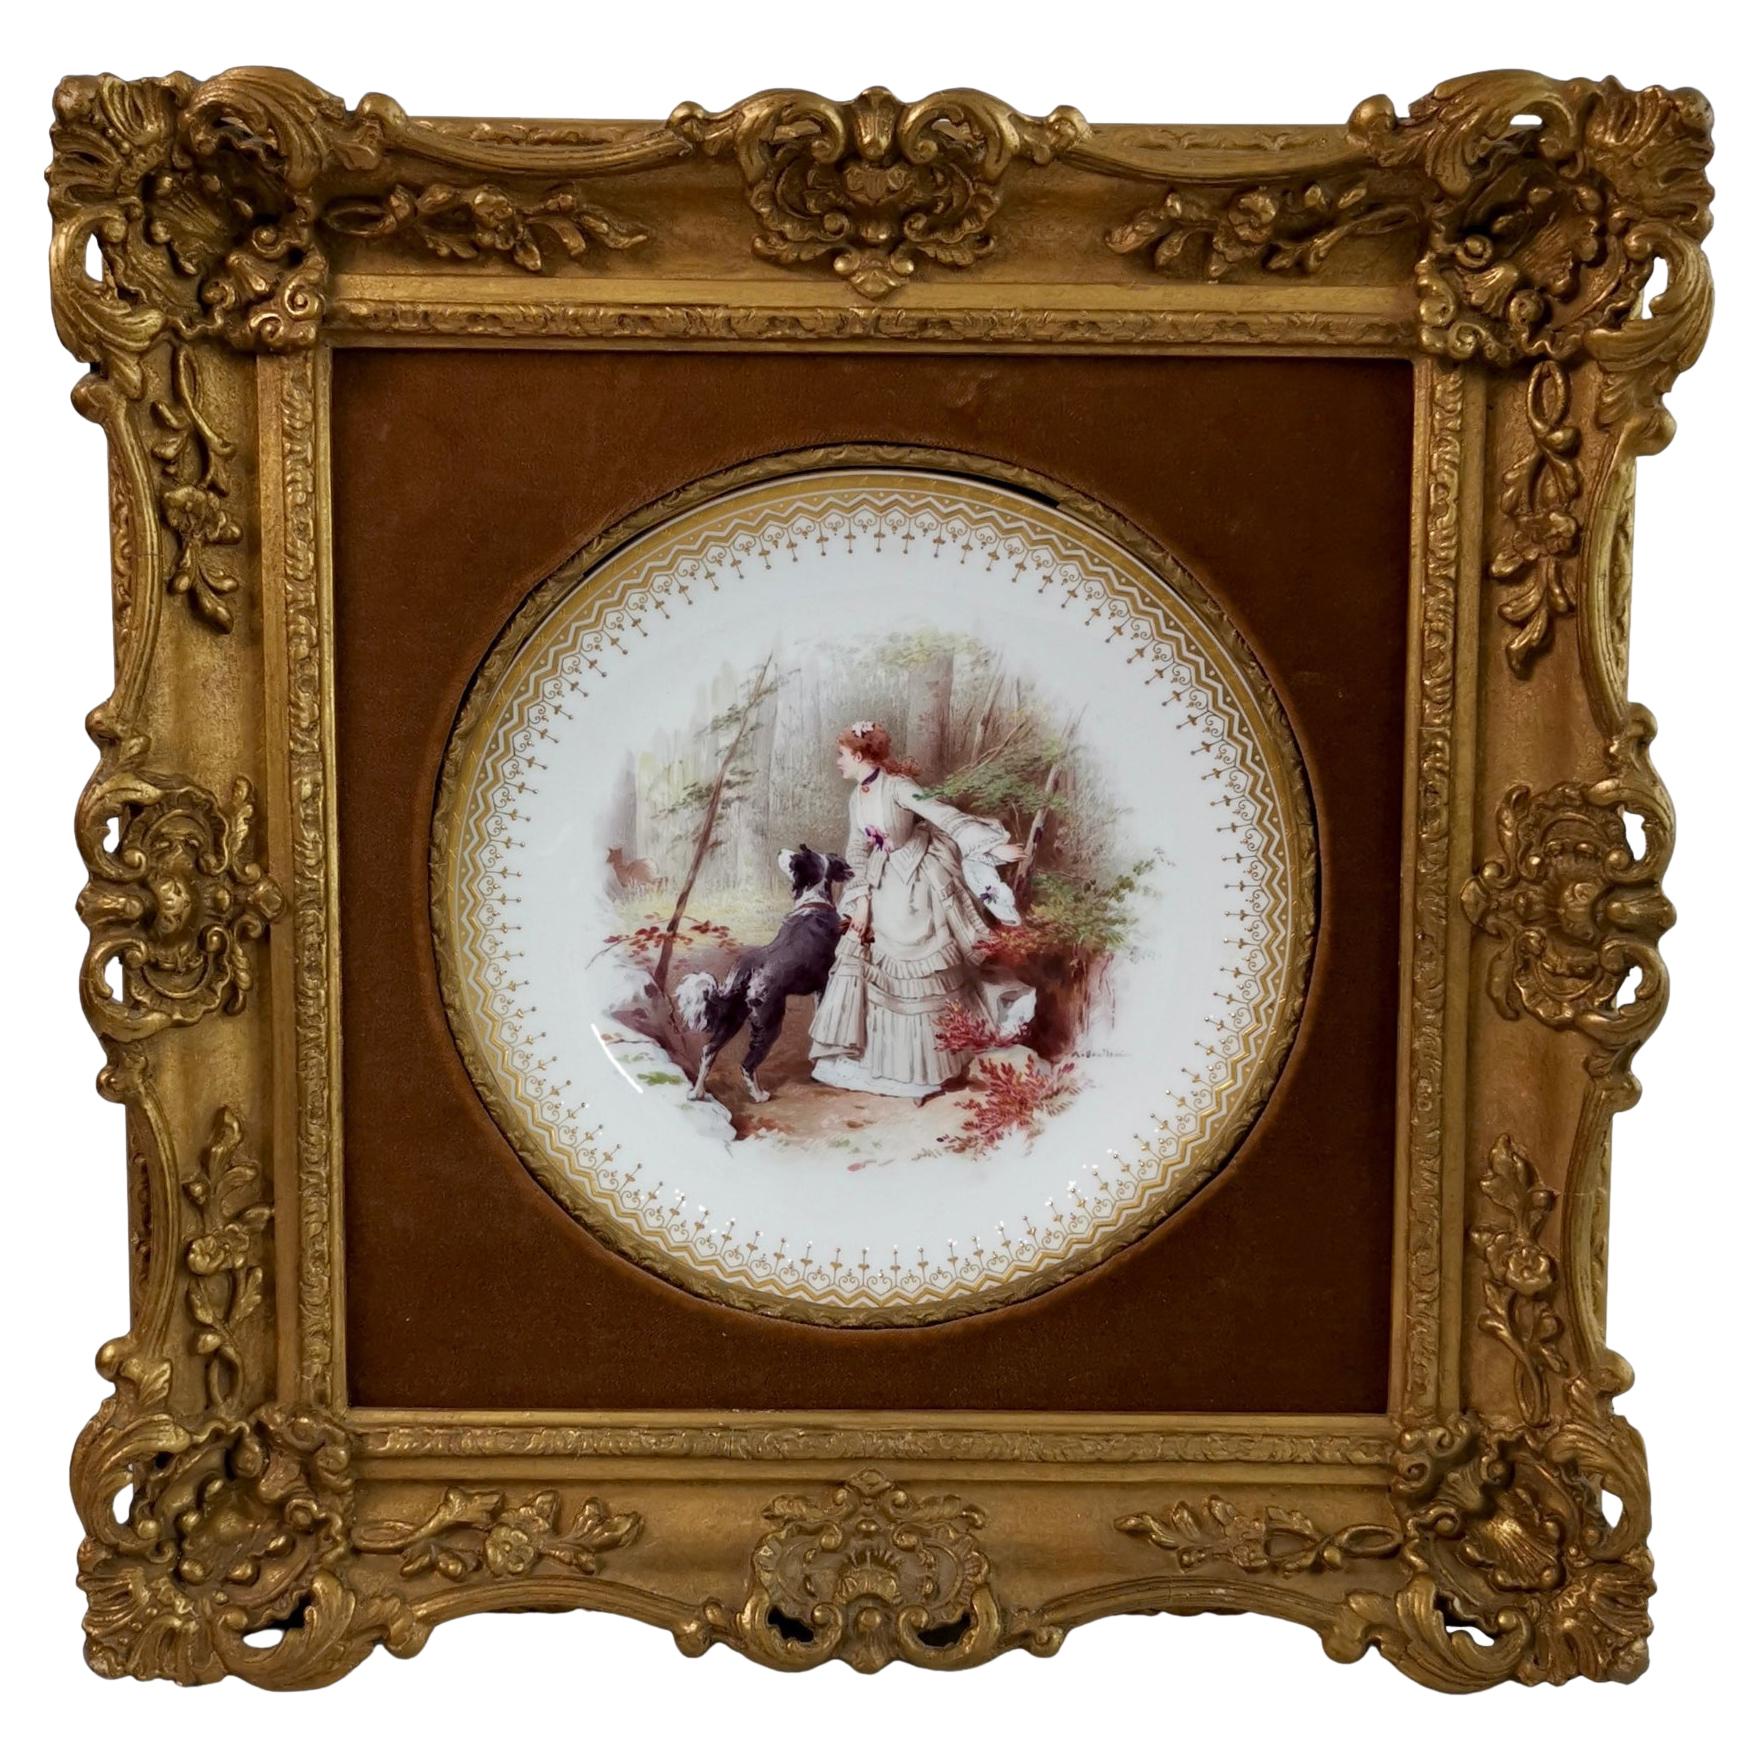 Minton Framed Cabinet Plate, Italianate Gilt, Lady in Forest, A.Boullemier, 1882